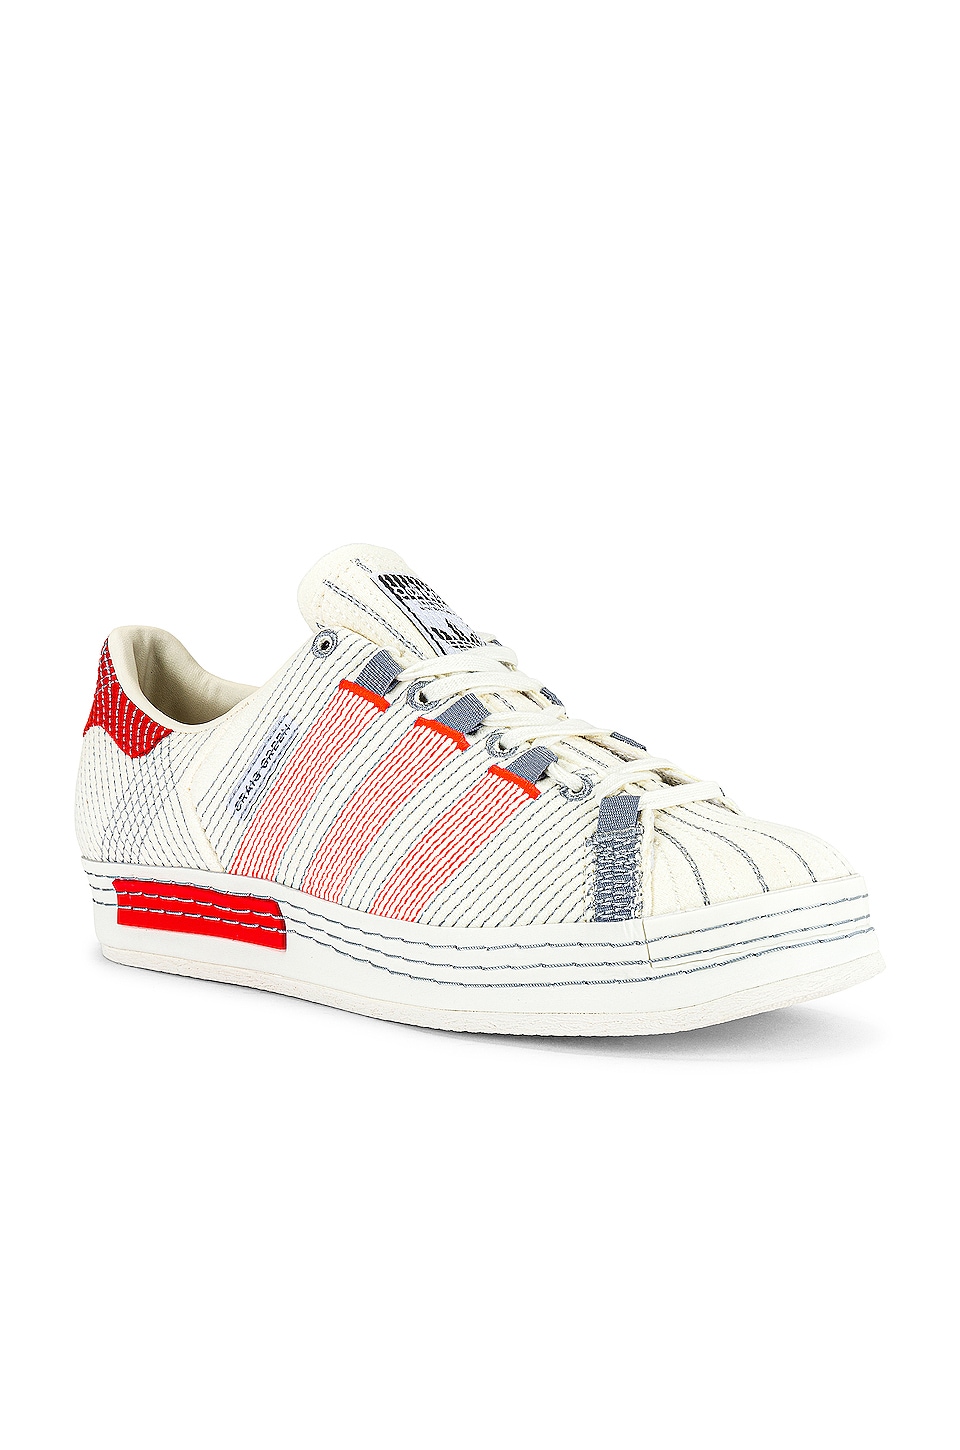 adidas by Craig Green Superstar Sneaker in Off White & Bright Red ...